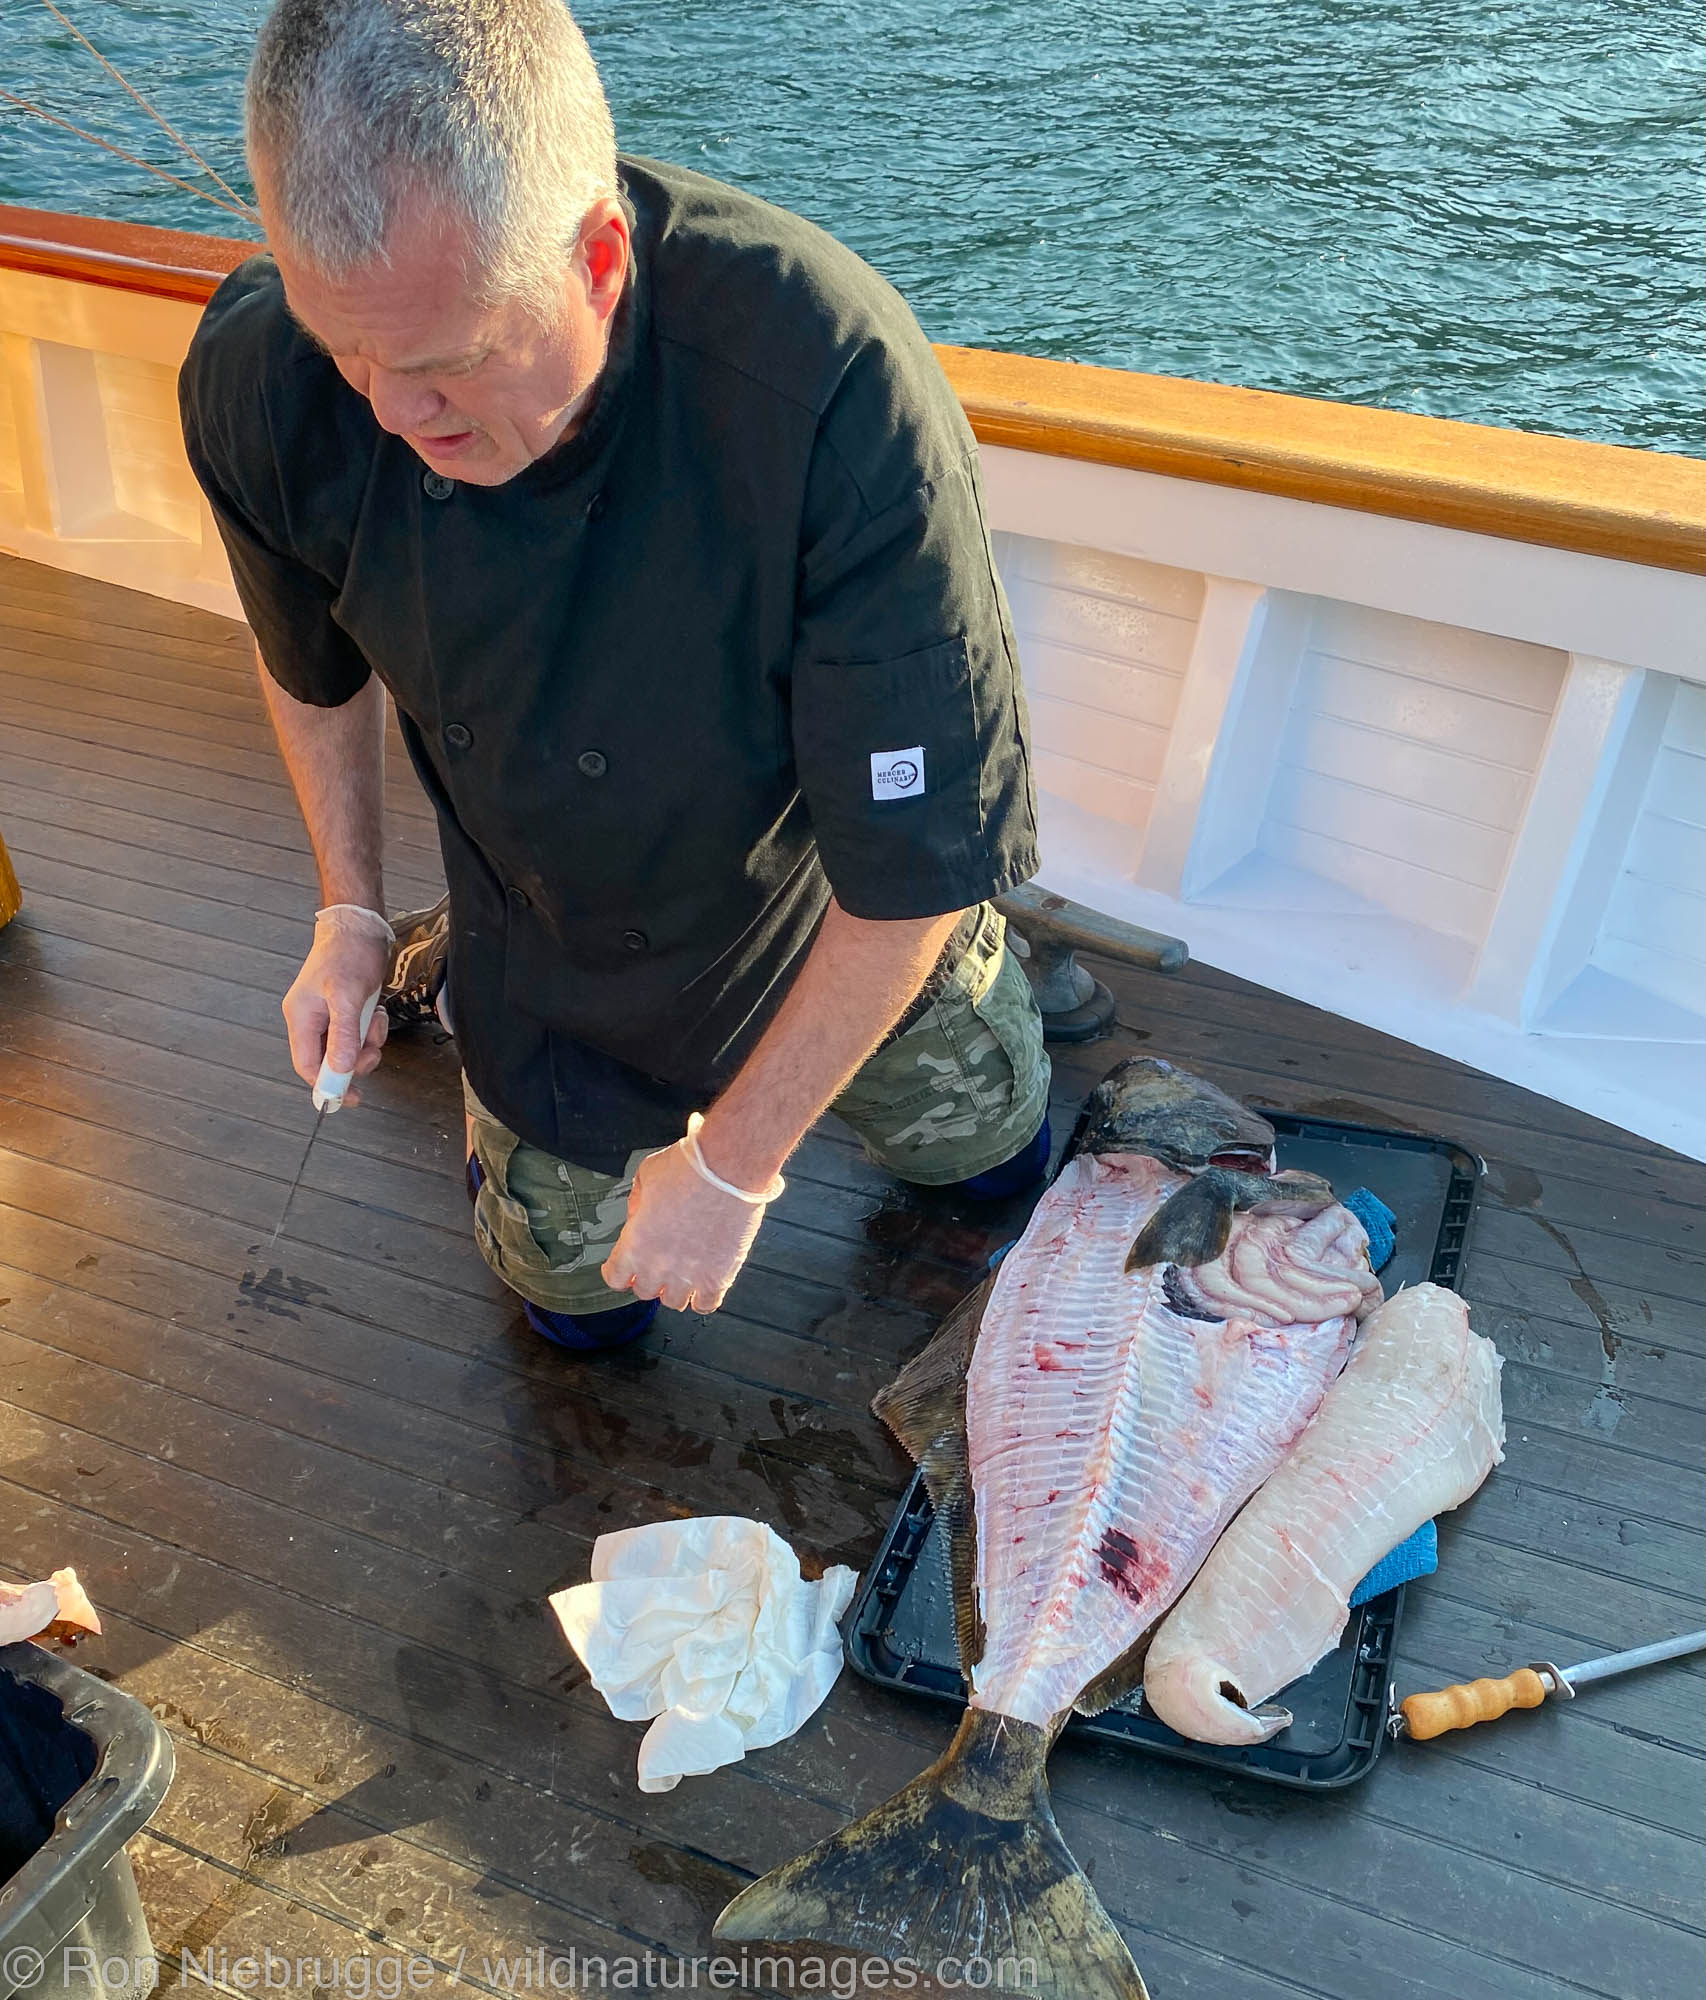 Chef taking care of a halibut caught while we were watching bears.